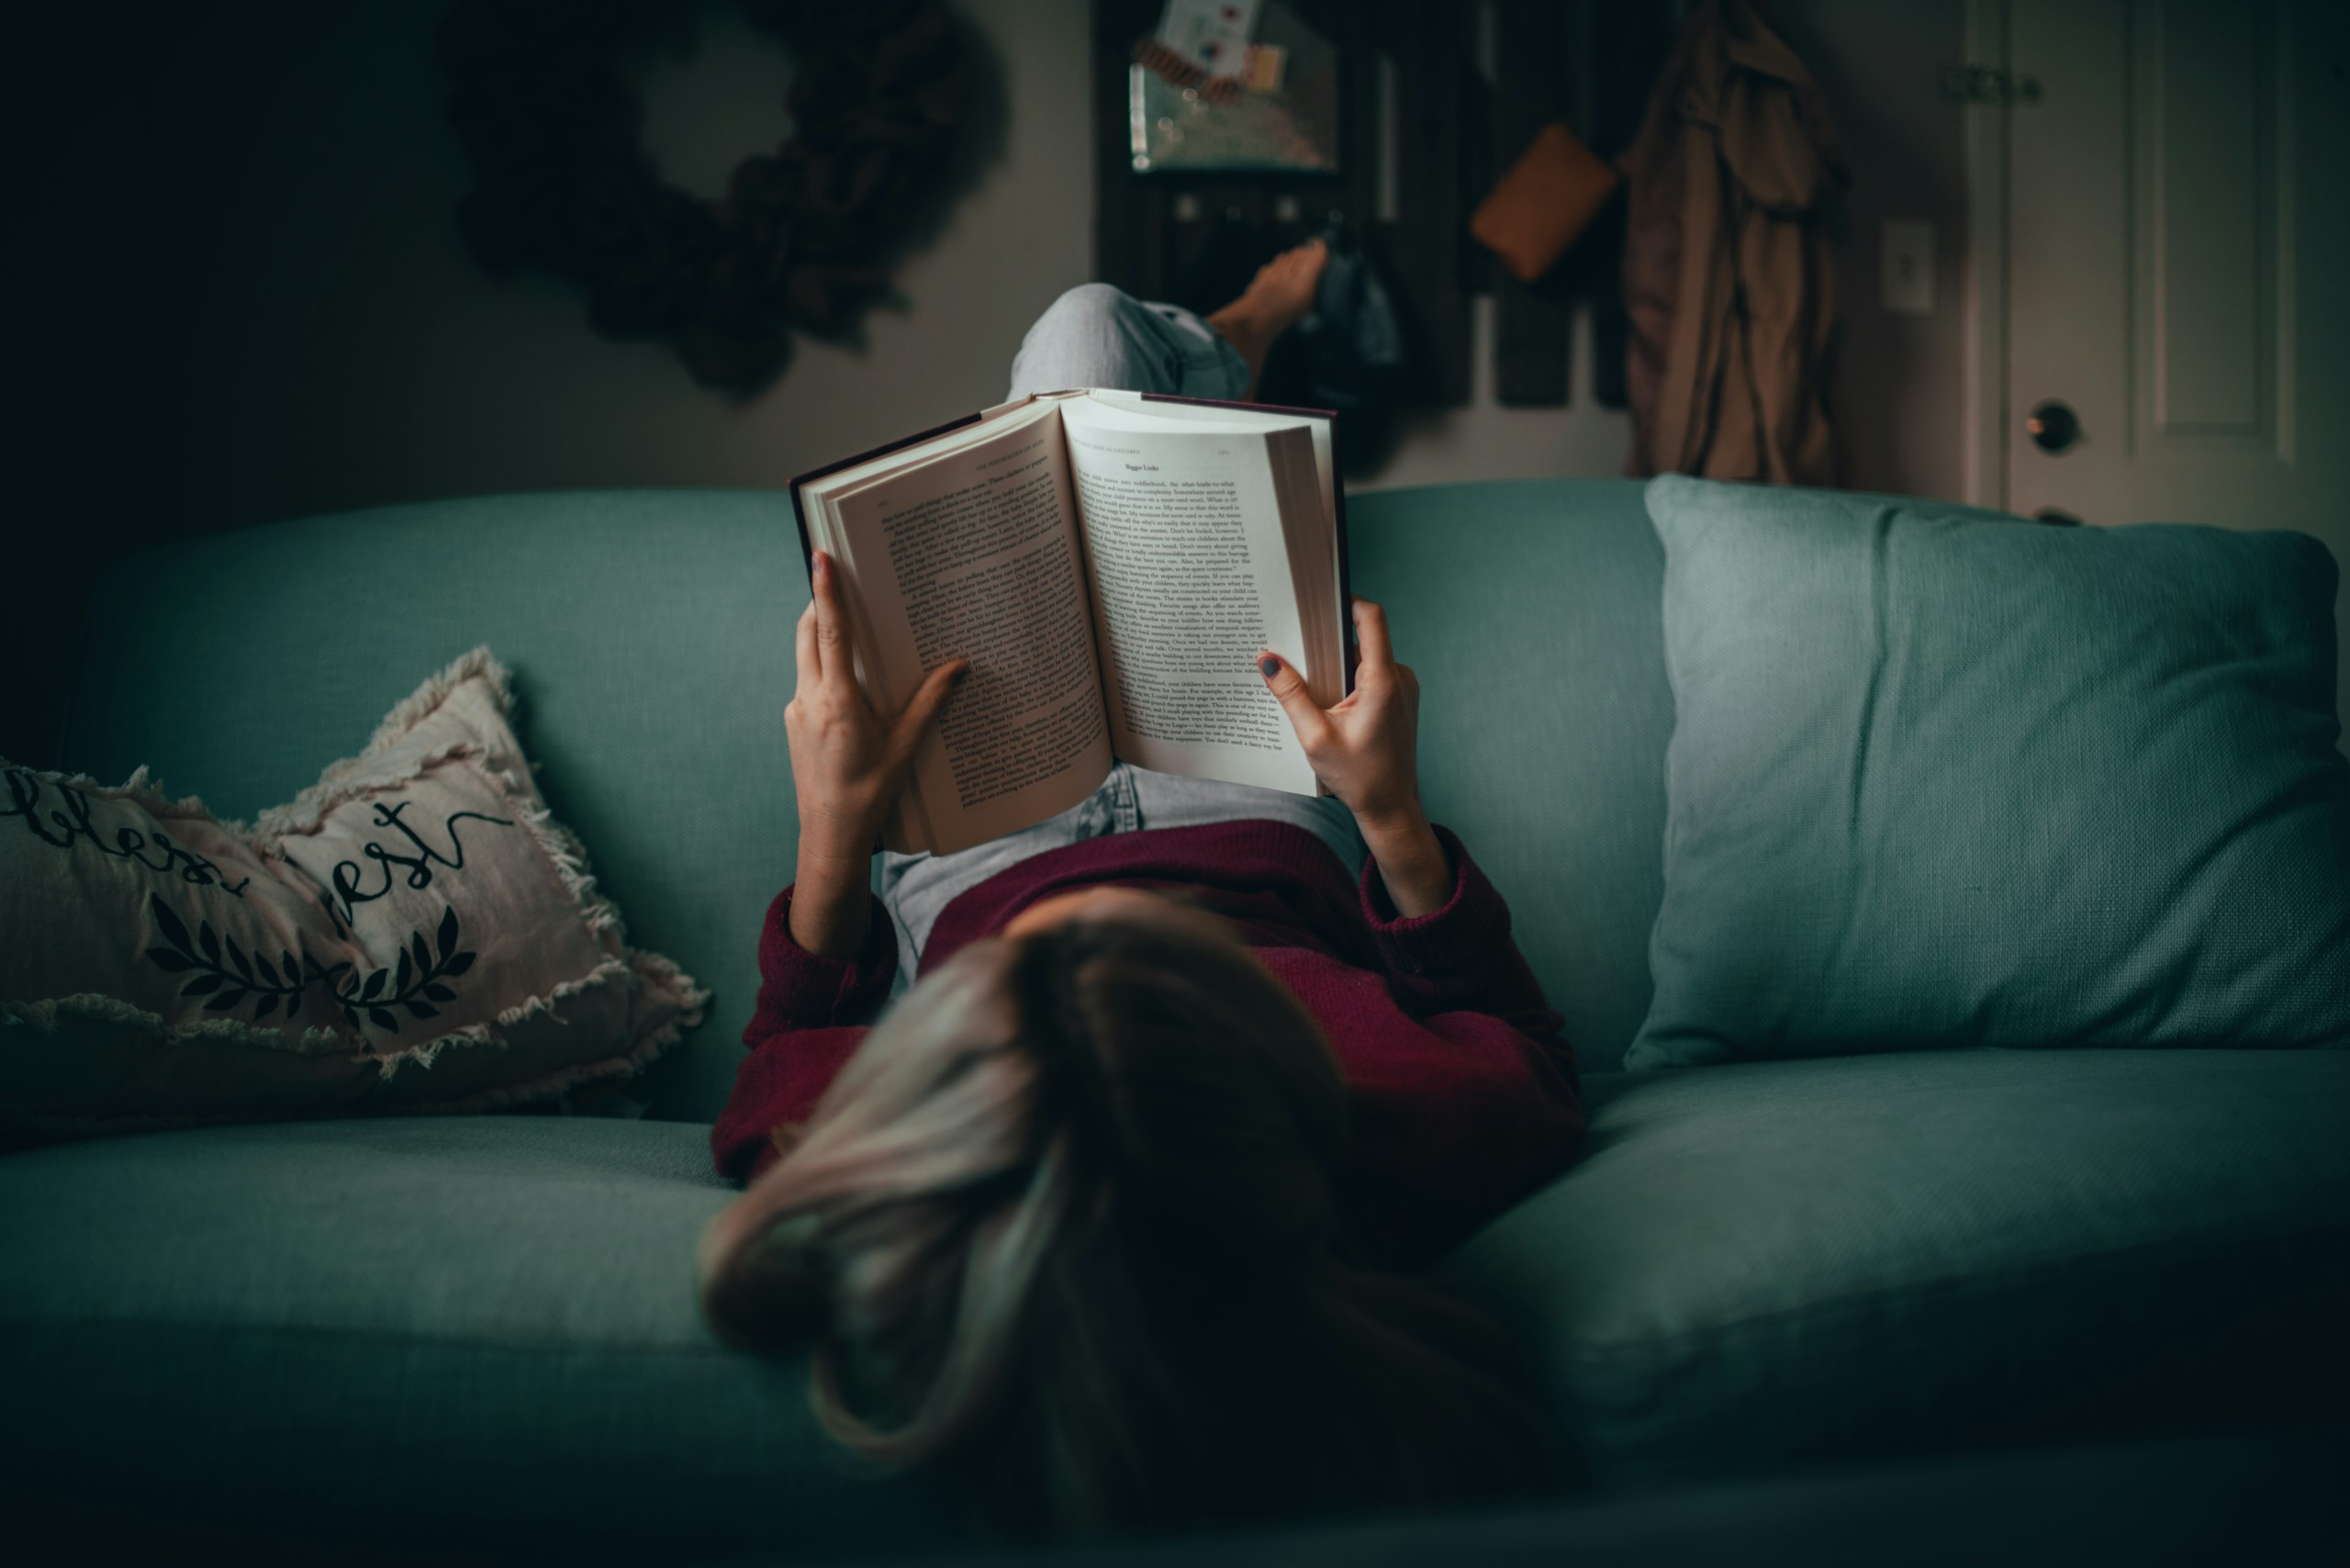 a photo of a woman reading upside down on a couch